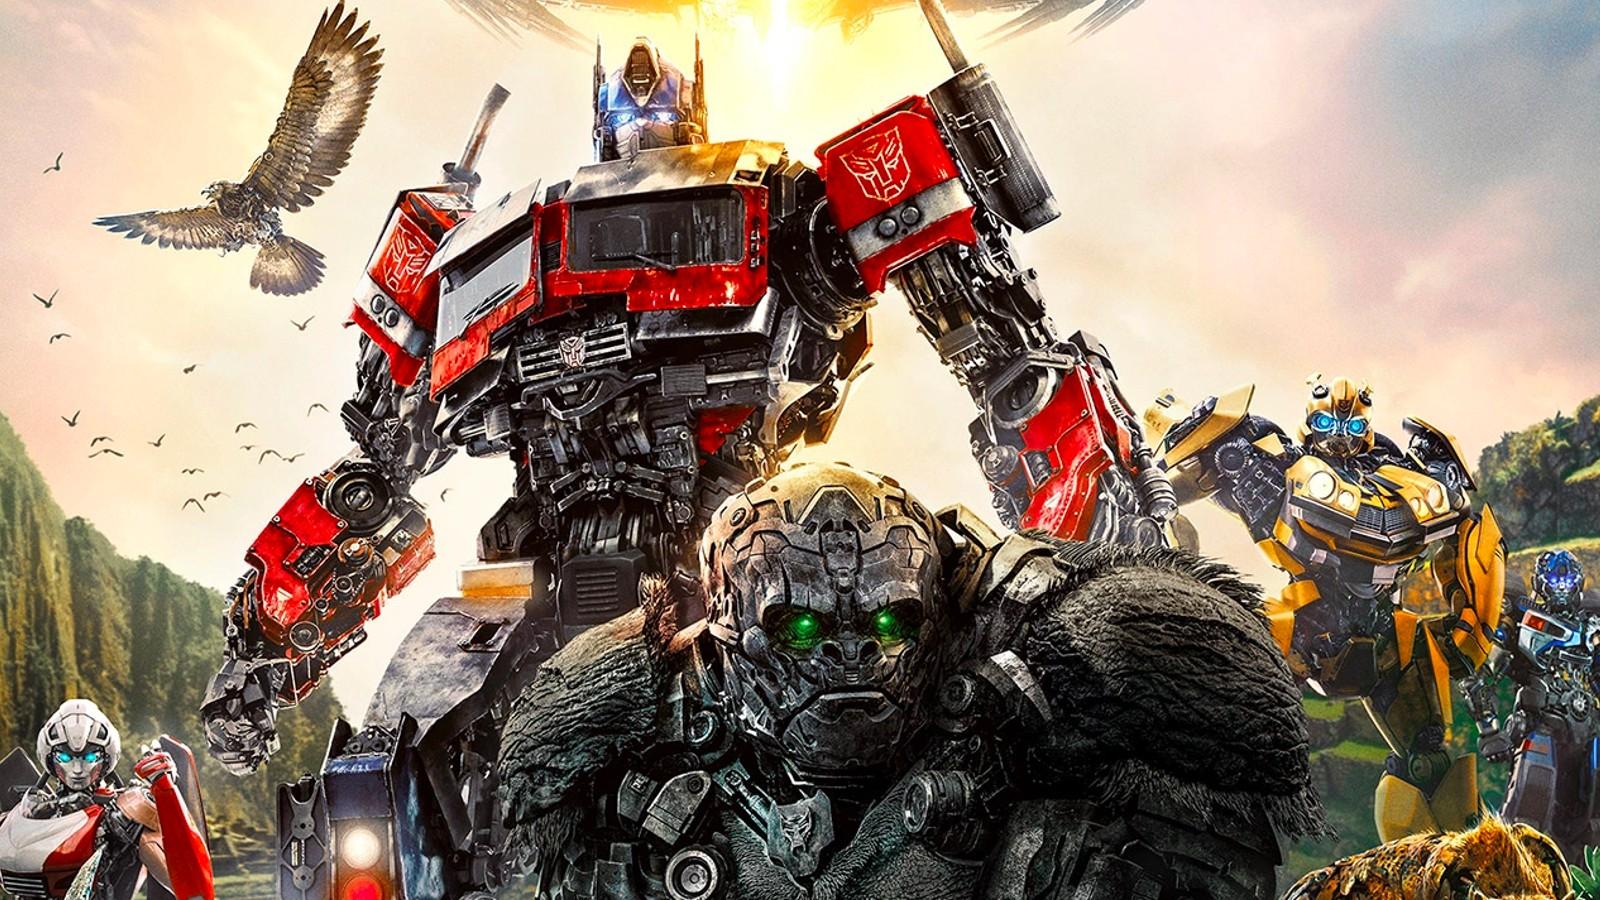 A still from Transformers: Rise of the Beasts, the seventh of the Transformers movies